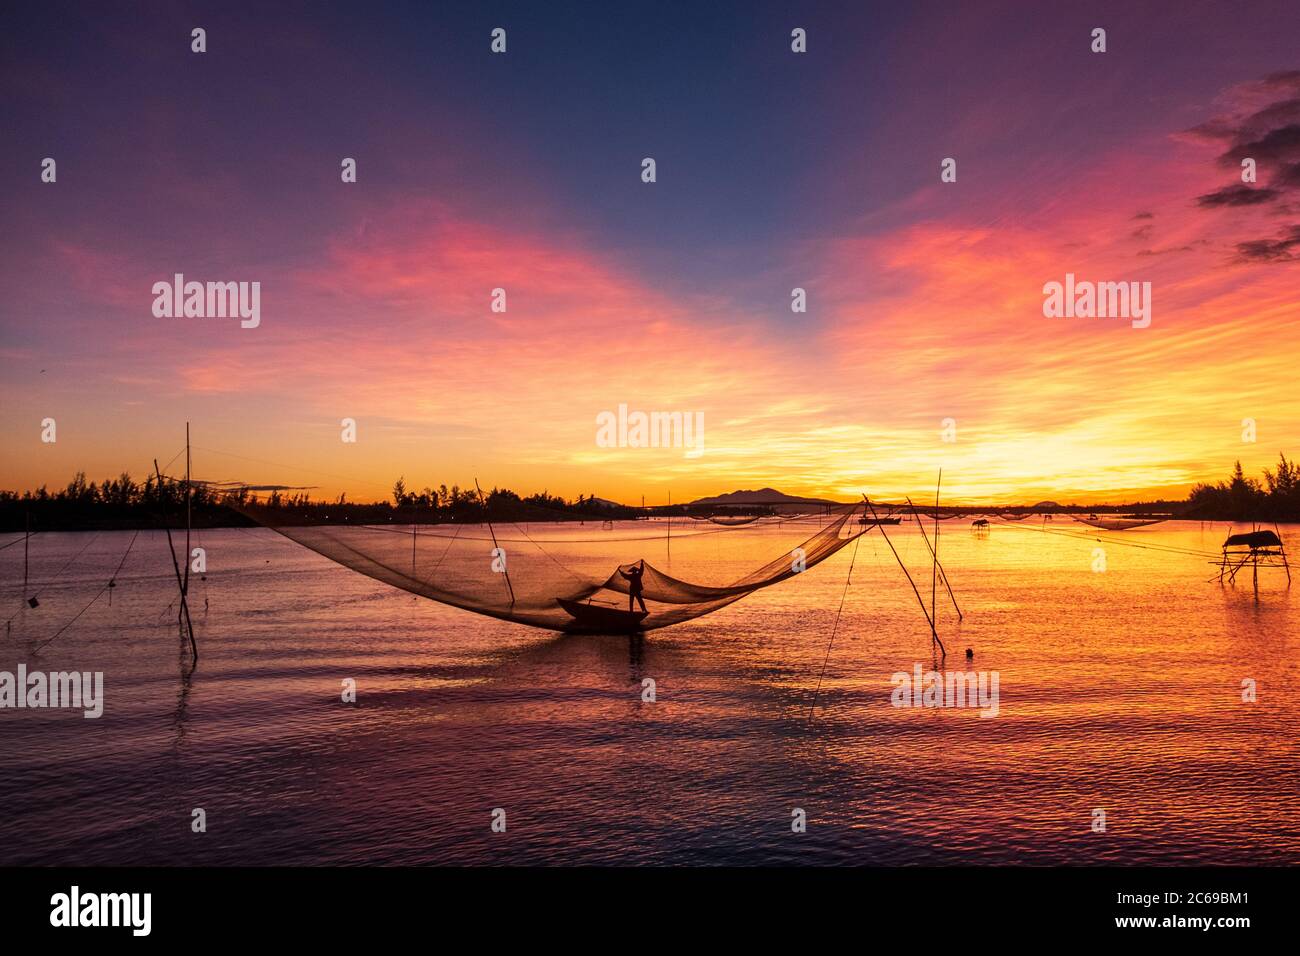 Silhouette of a fisherman checking his nets at sunrise, Vietnam Stock Photo